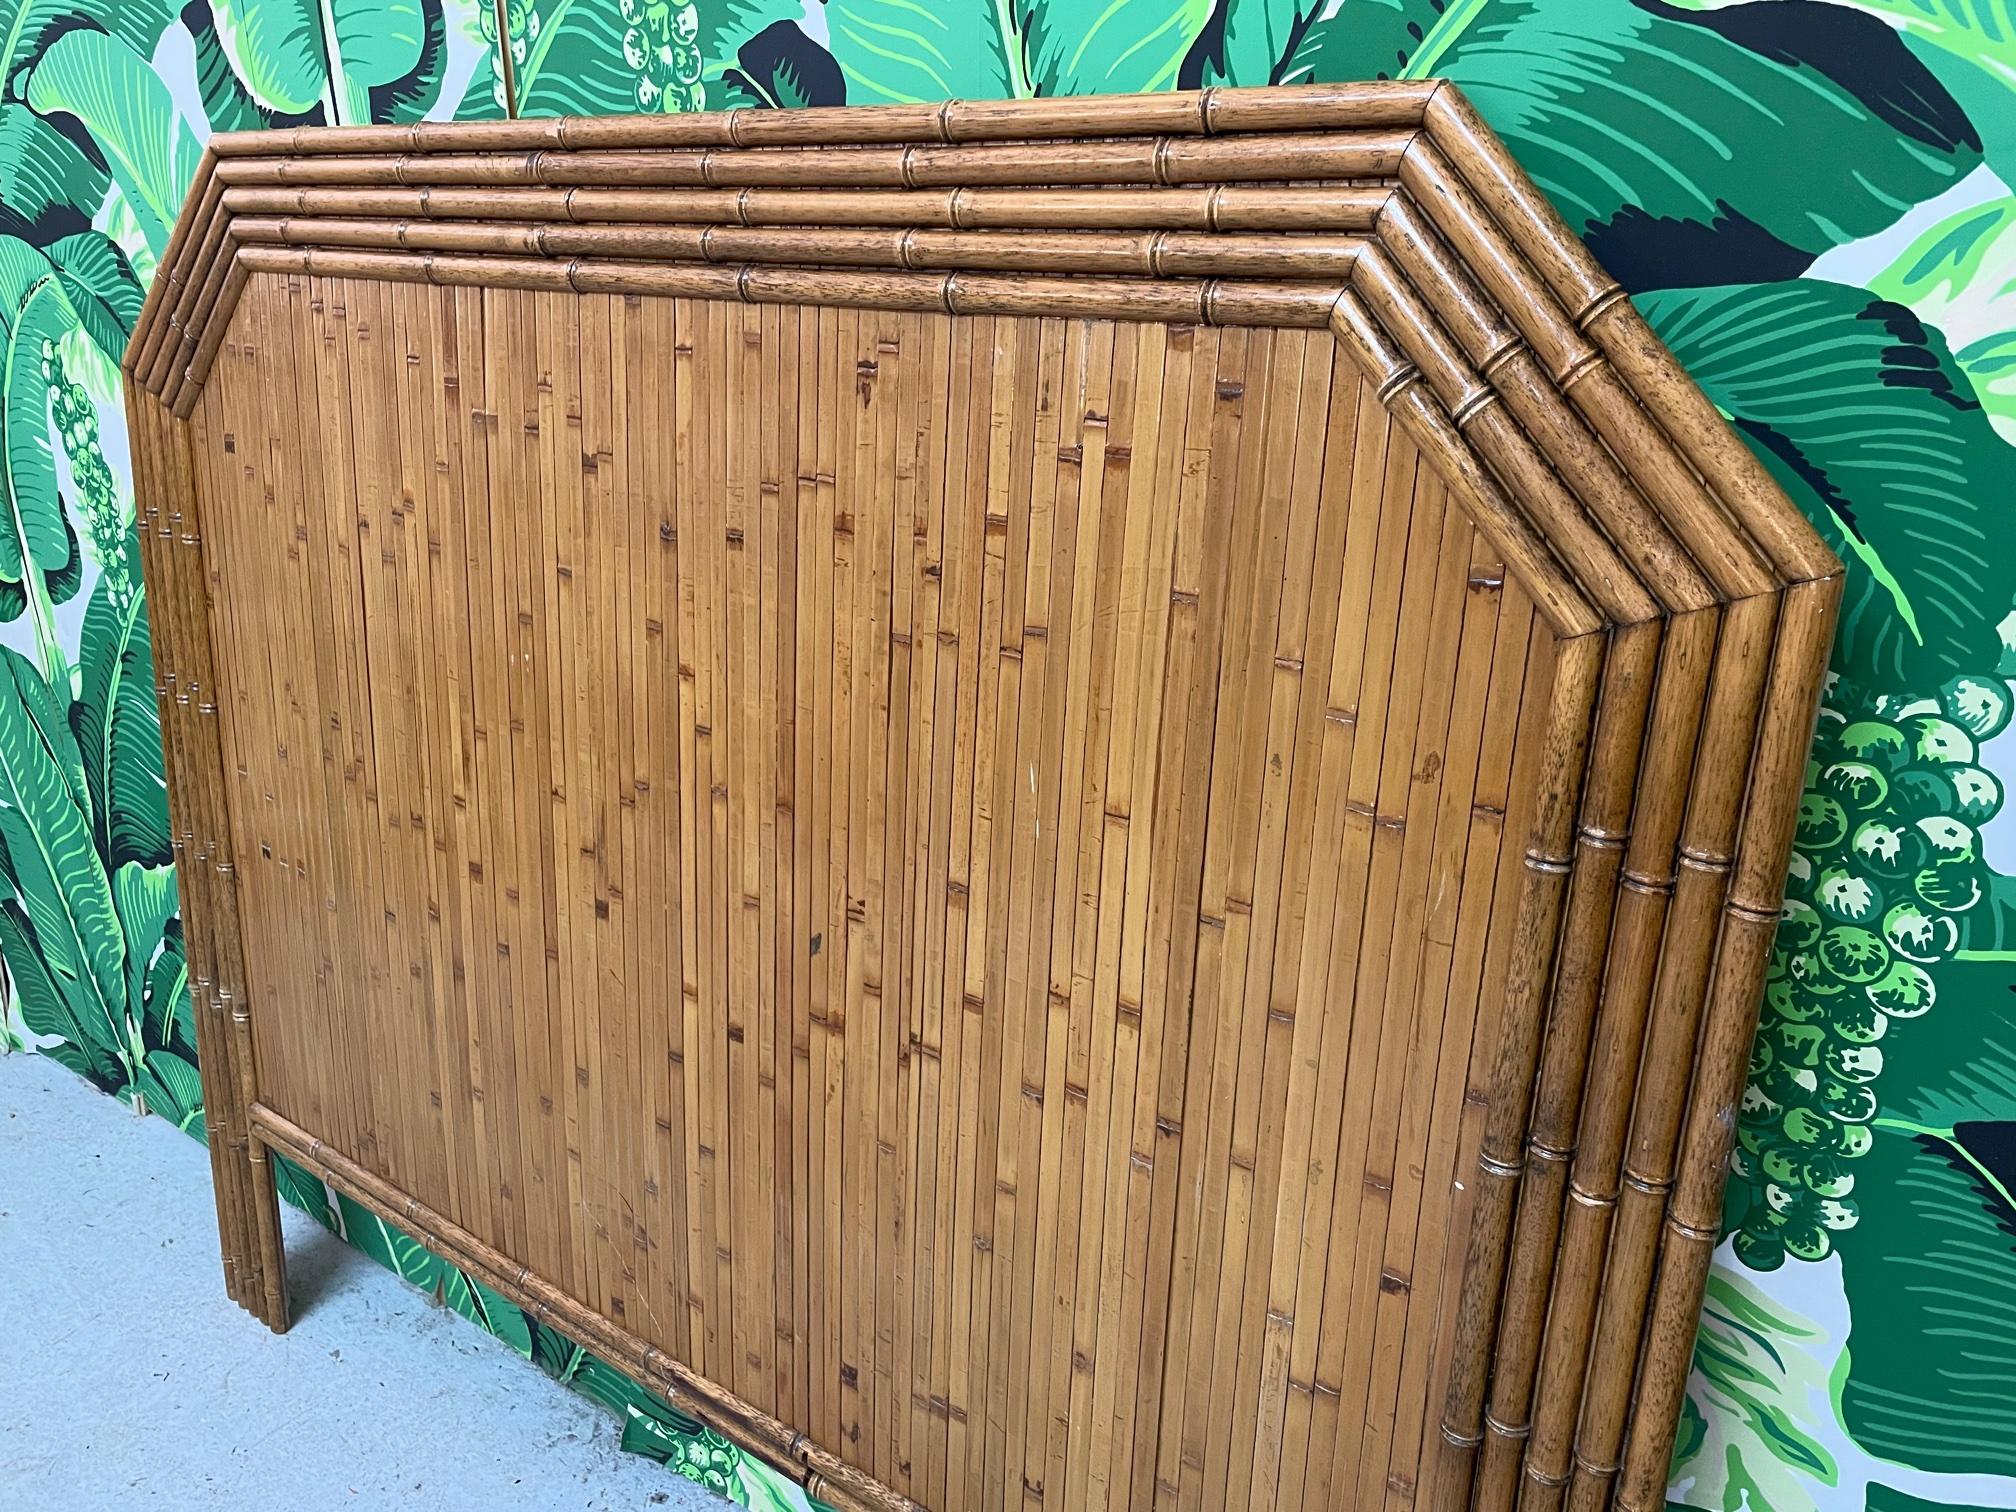 Vintage headboard features a full veneer of split reed rattan and faux bamboo detailing. Bed size is full. Very good condition with minor imperfections consistent with age.